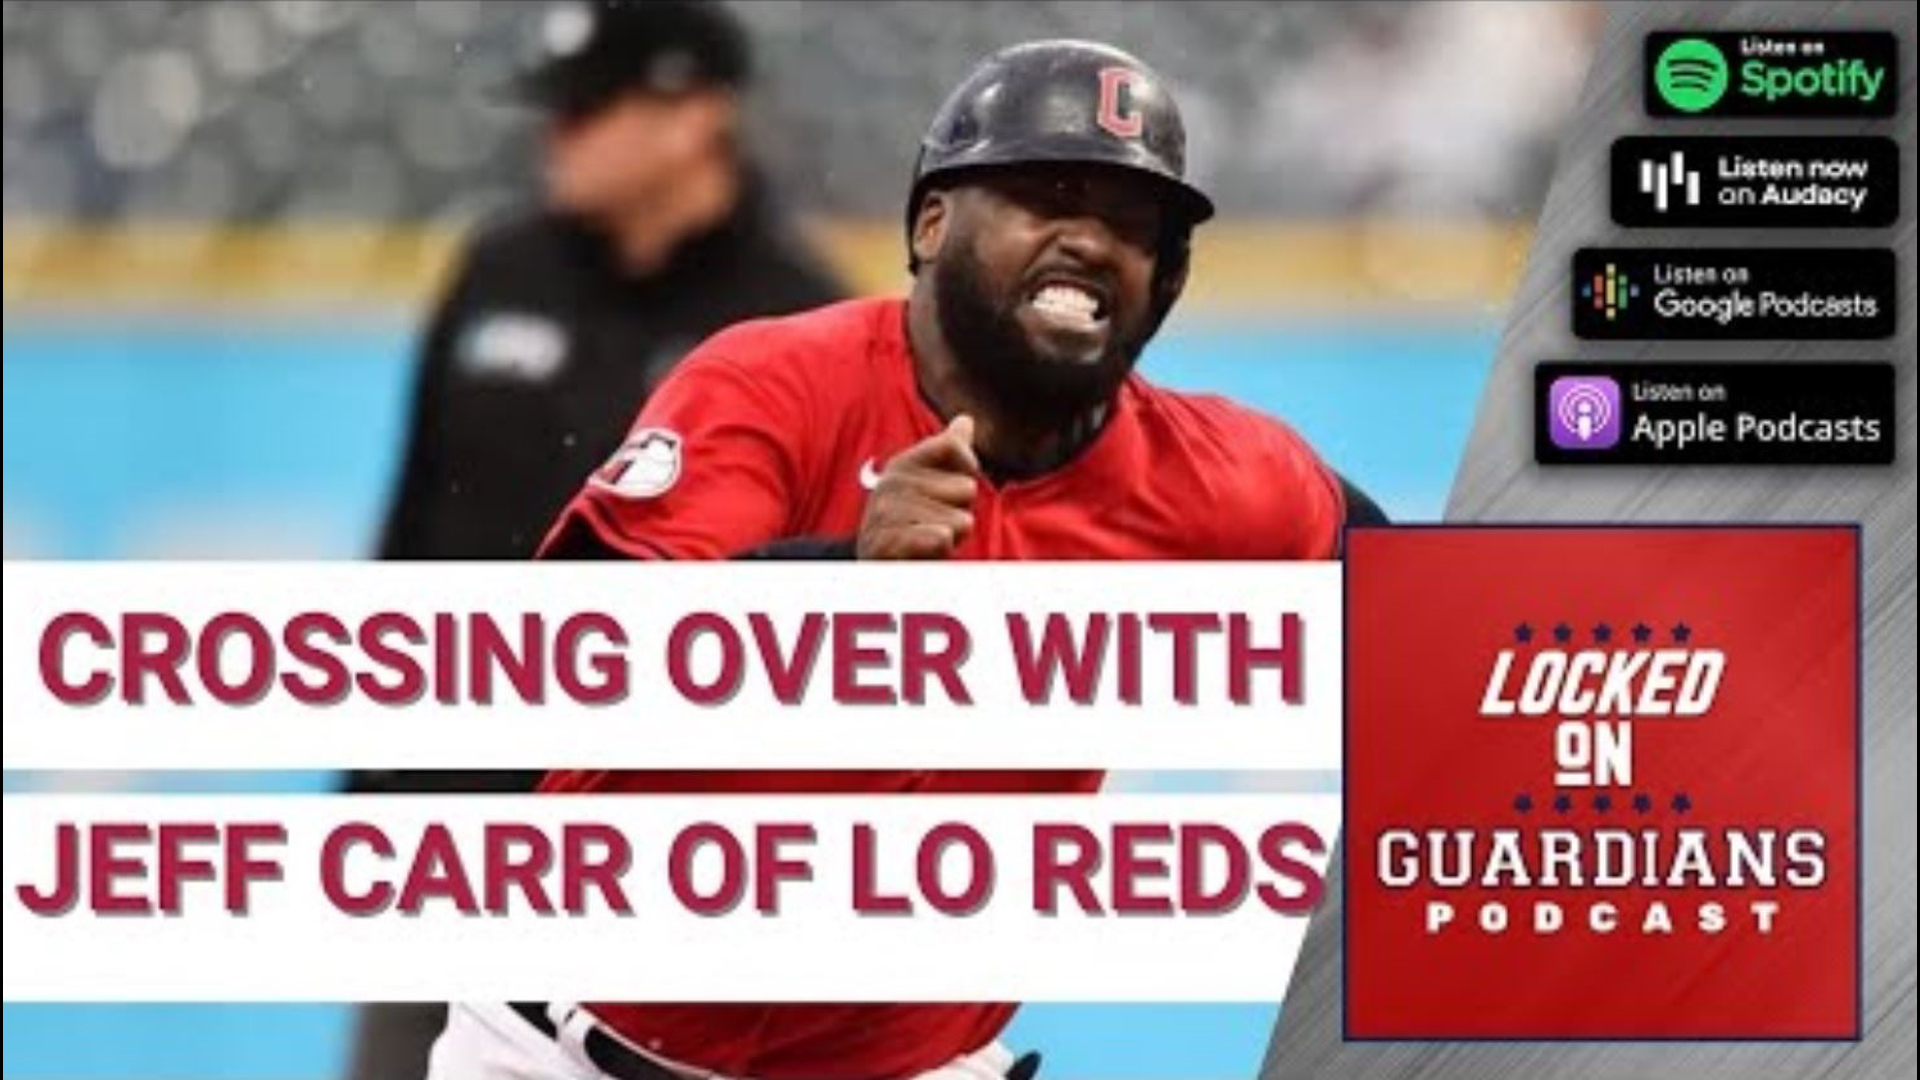 Crossover episode with Jeff Carr of Locked on Reds. We look back at a rough series for the Guardians at home against the Cincinnati Reds.